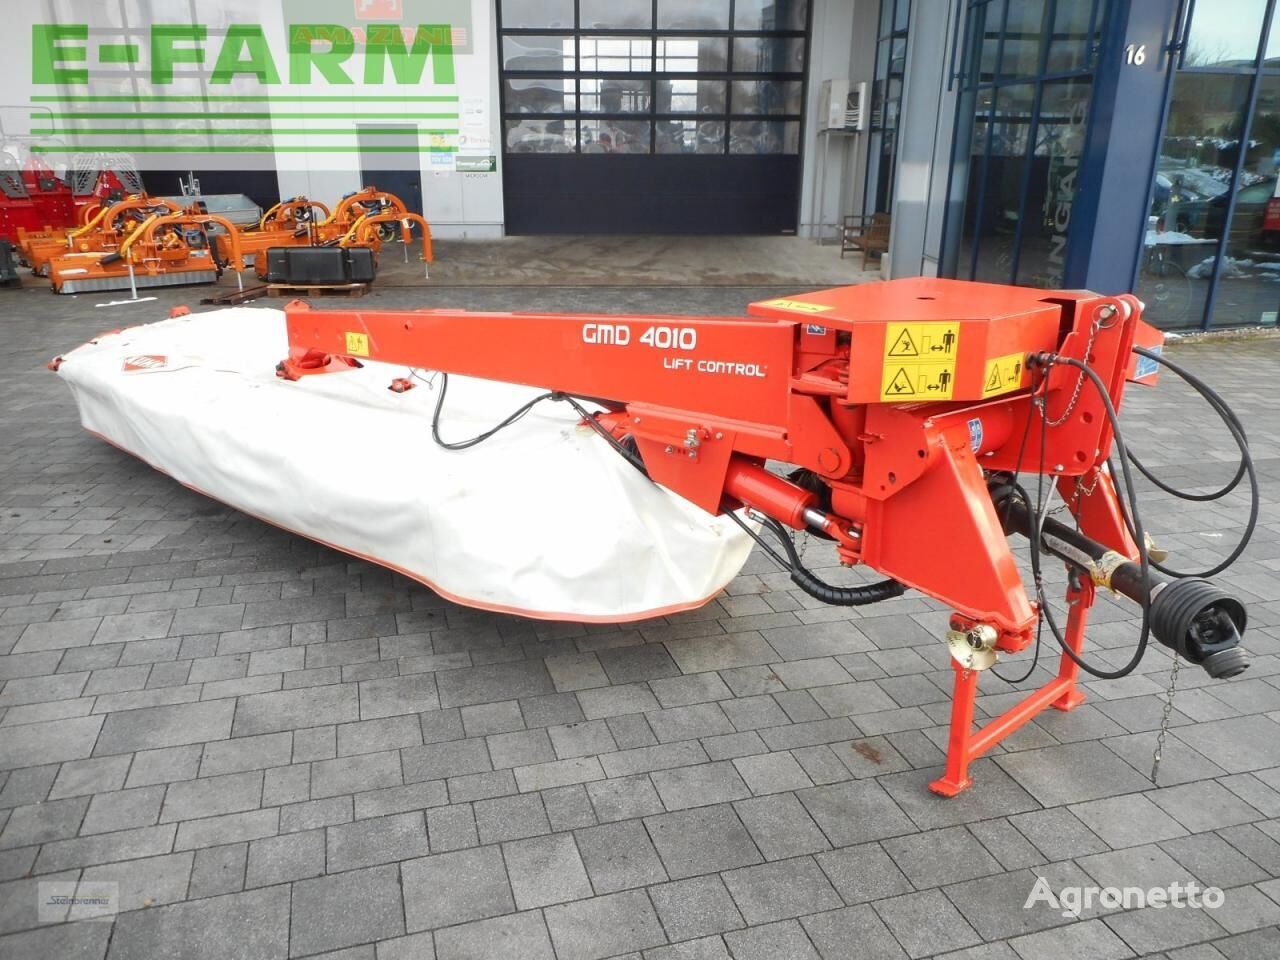 gmd 4010 lift-control rotary mower